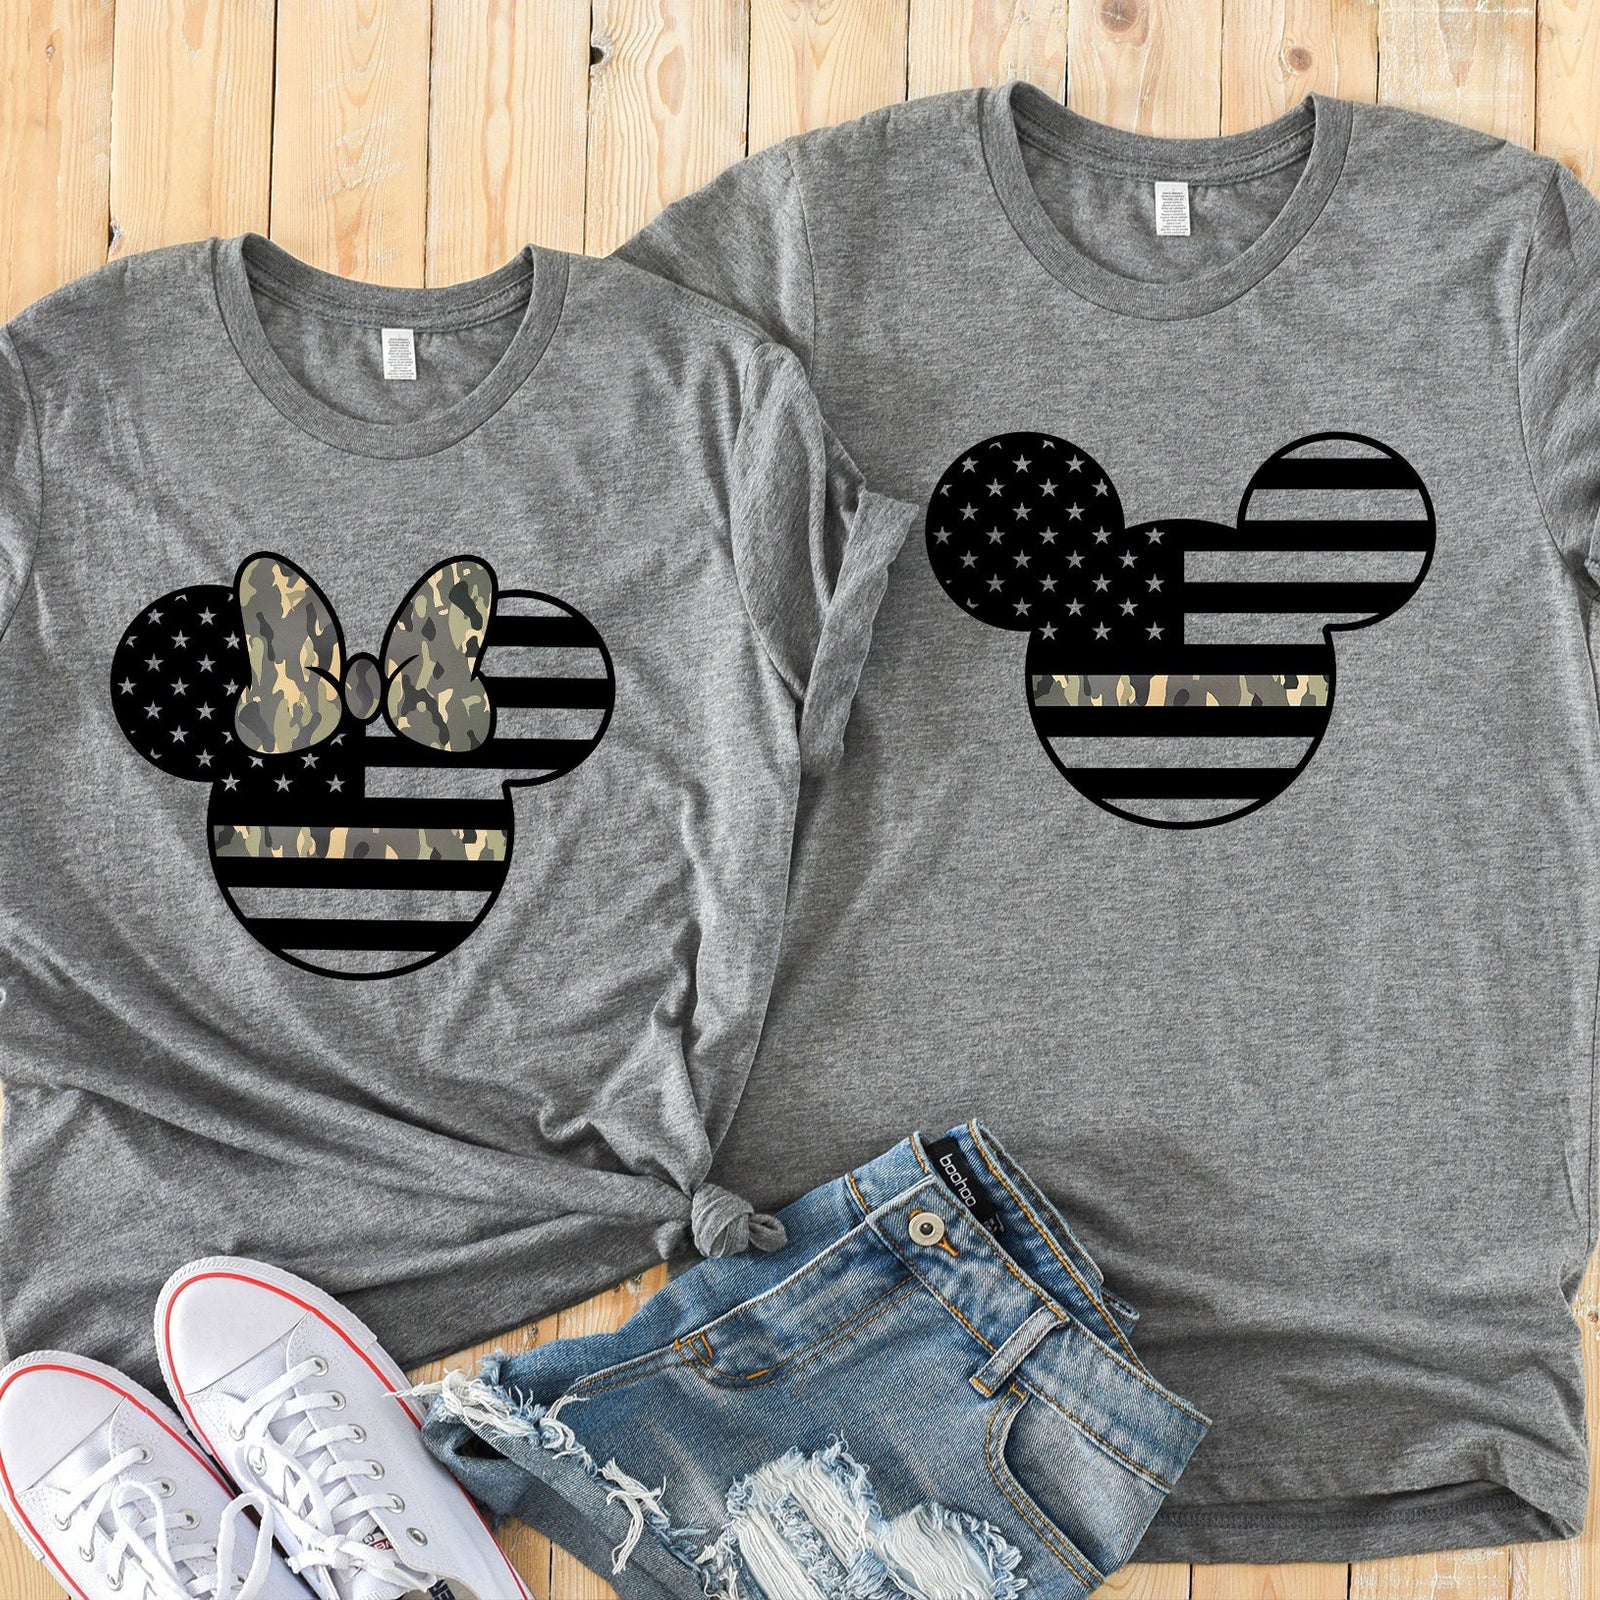 Minnie and Mickey Army Camouflaged Adult Shirts - Disney Couples - Military Matching Shirts - Armed Forces Stars and Stripes